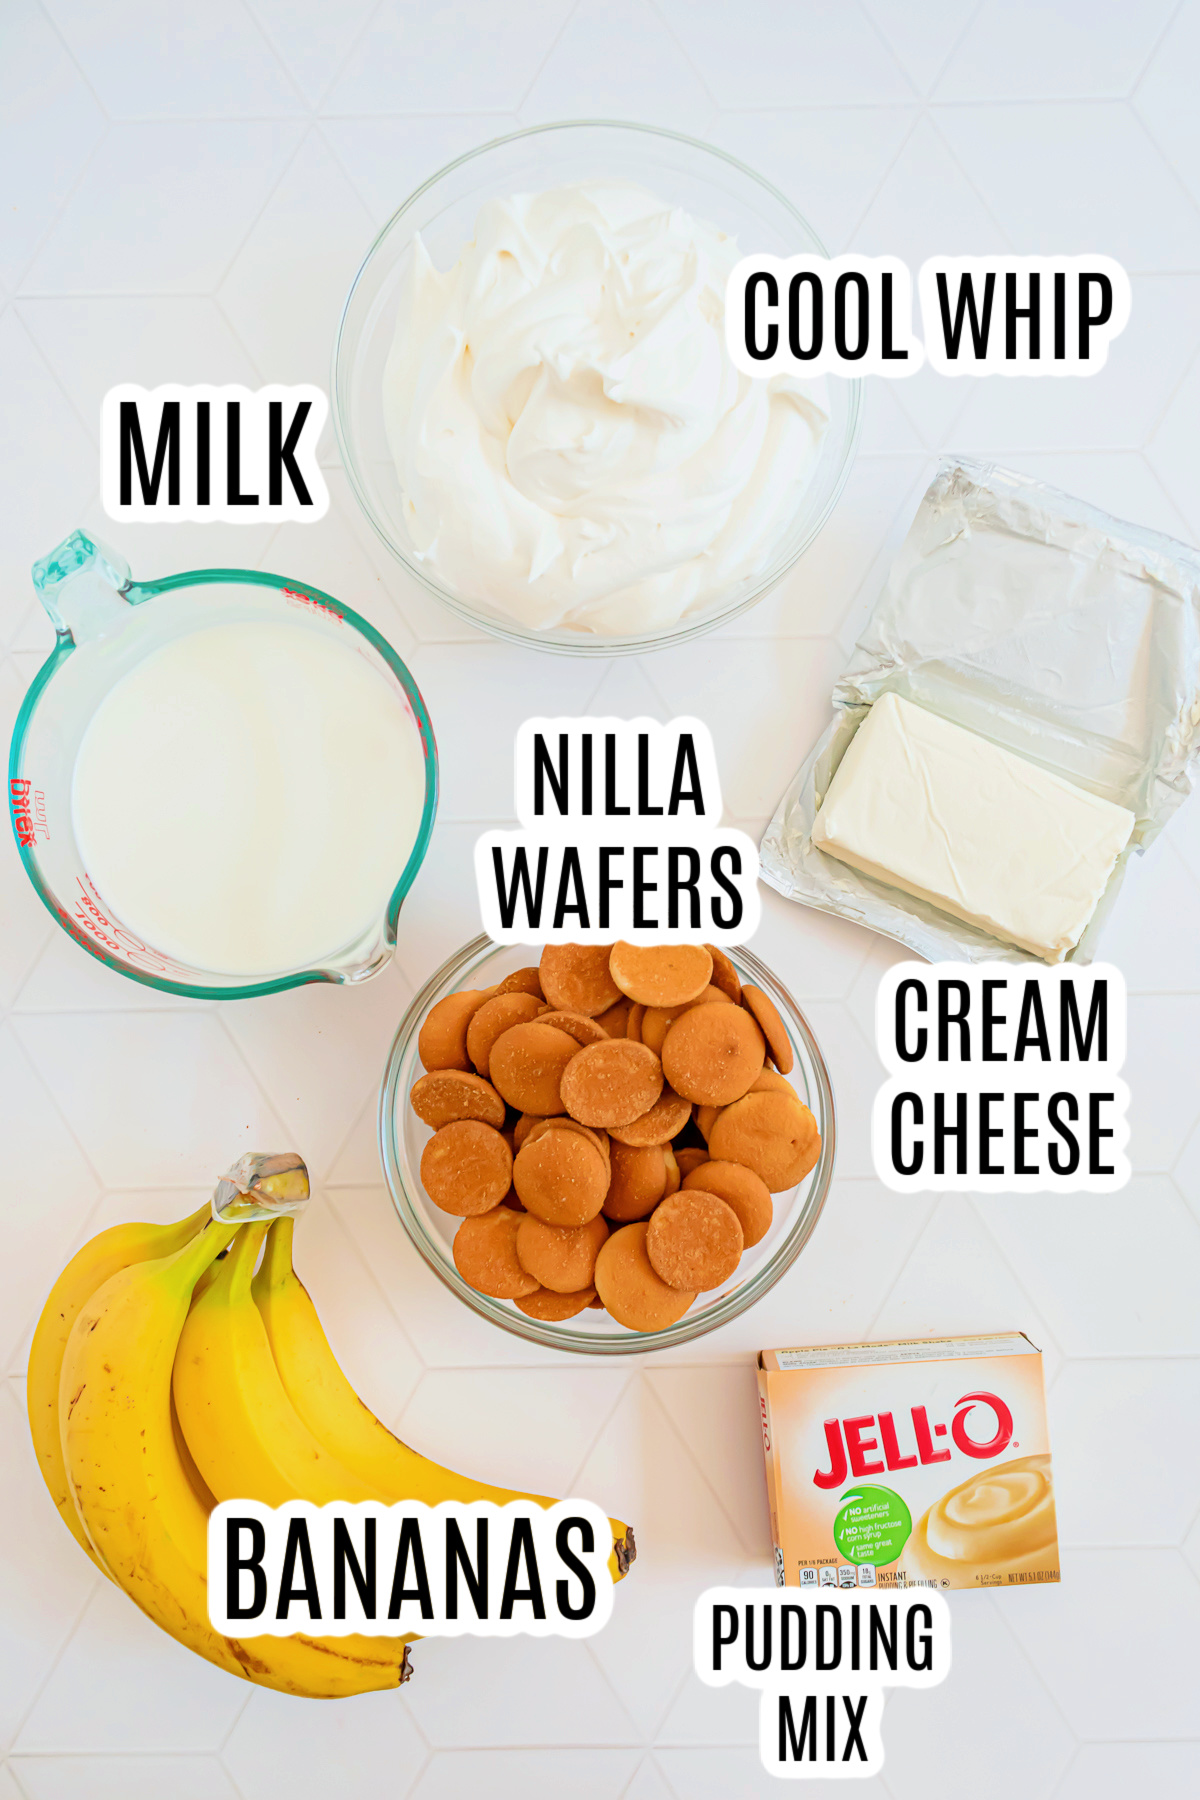 The ingredients needed to make the Banana Pudding with Cream Cheese include milk, cool whip, nilla wafers, cream cheese, bananas, and banana instant pudding mix.